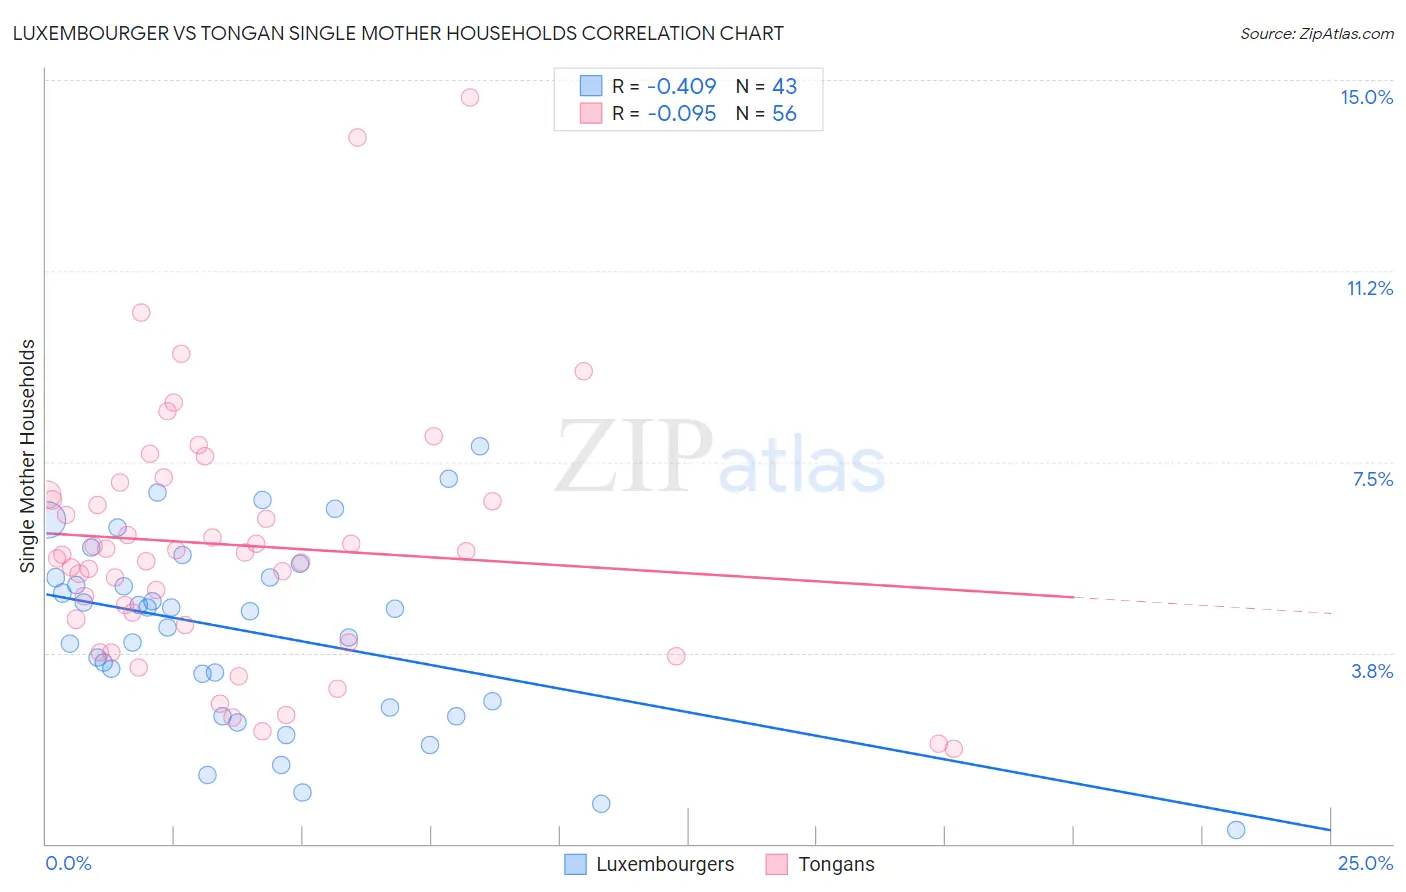 Luxembourger vs Tongan Single Mother Households